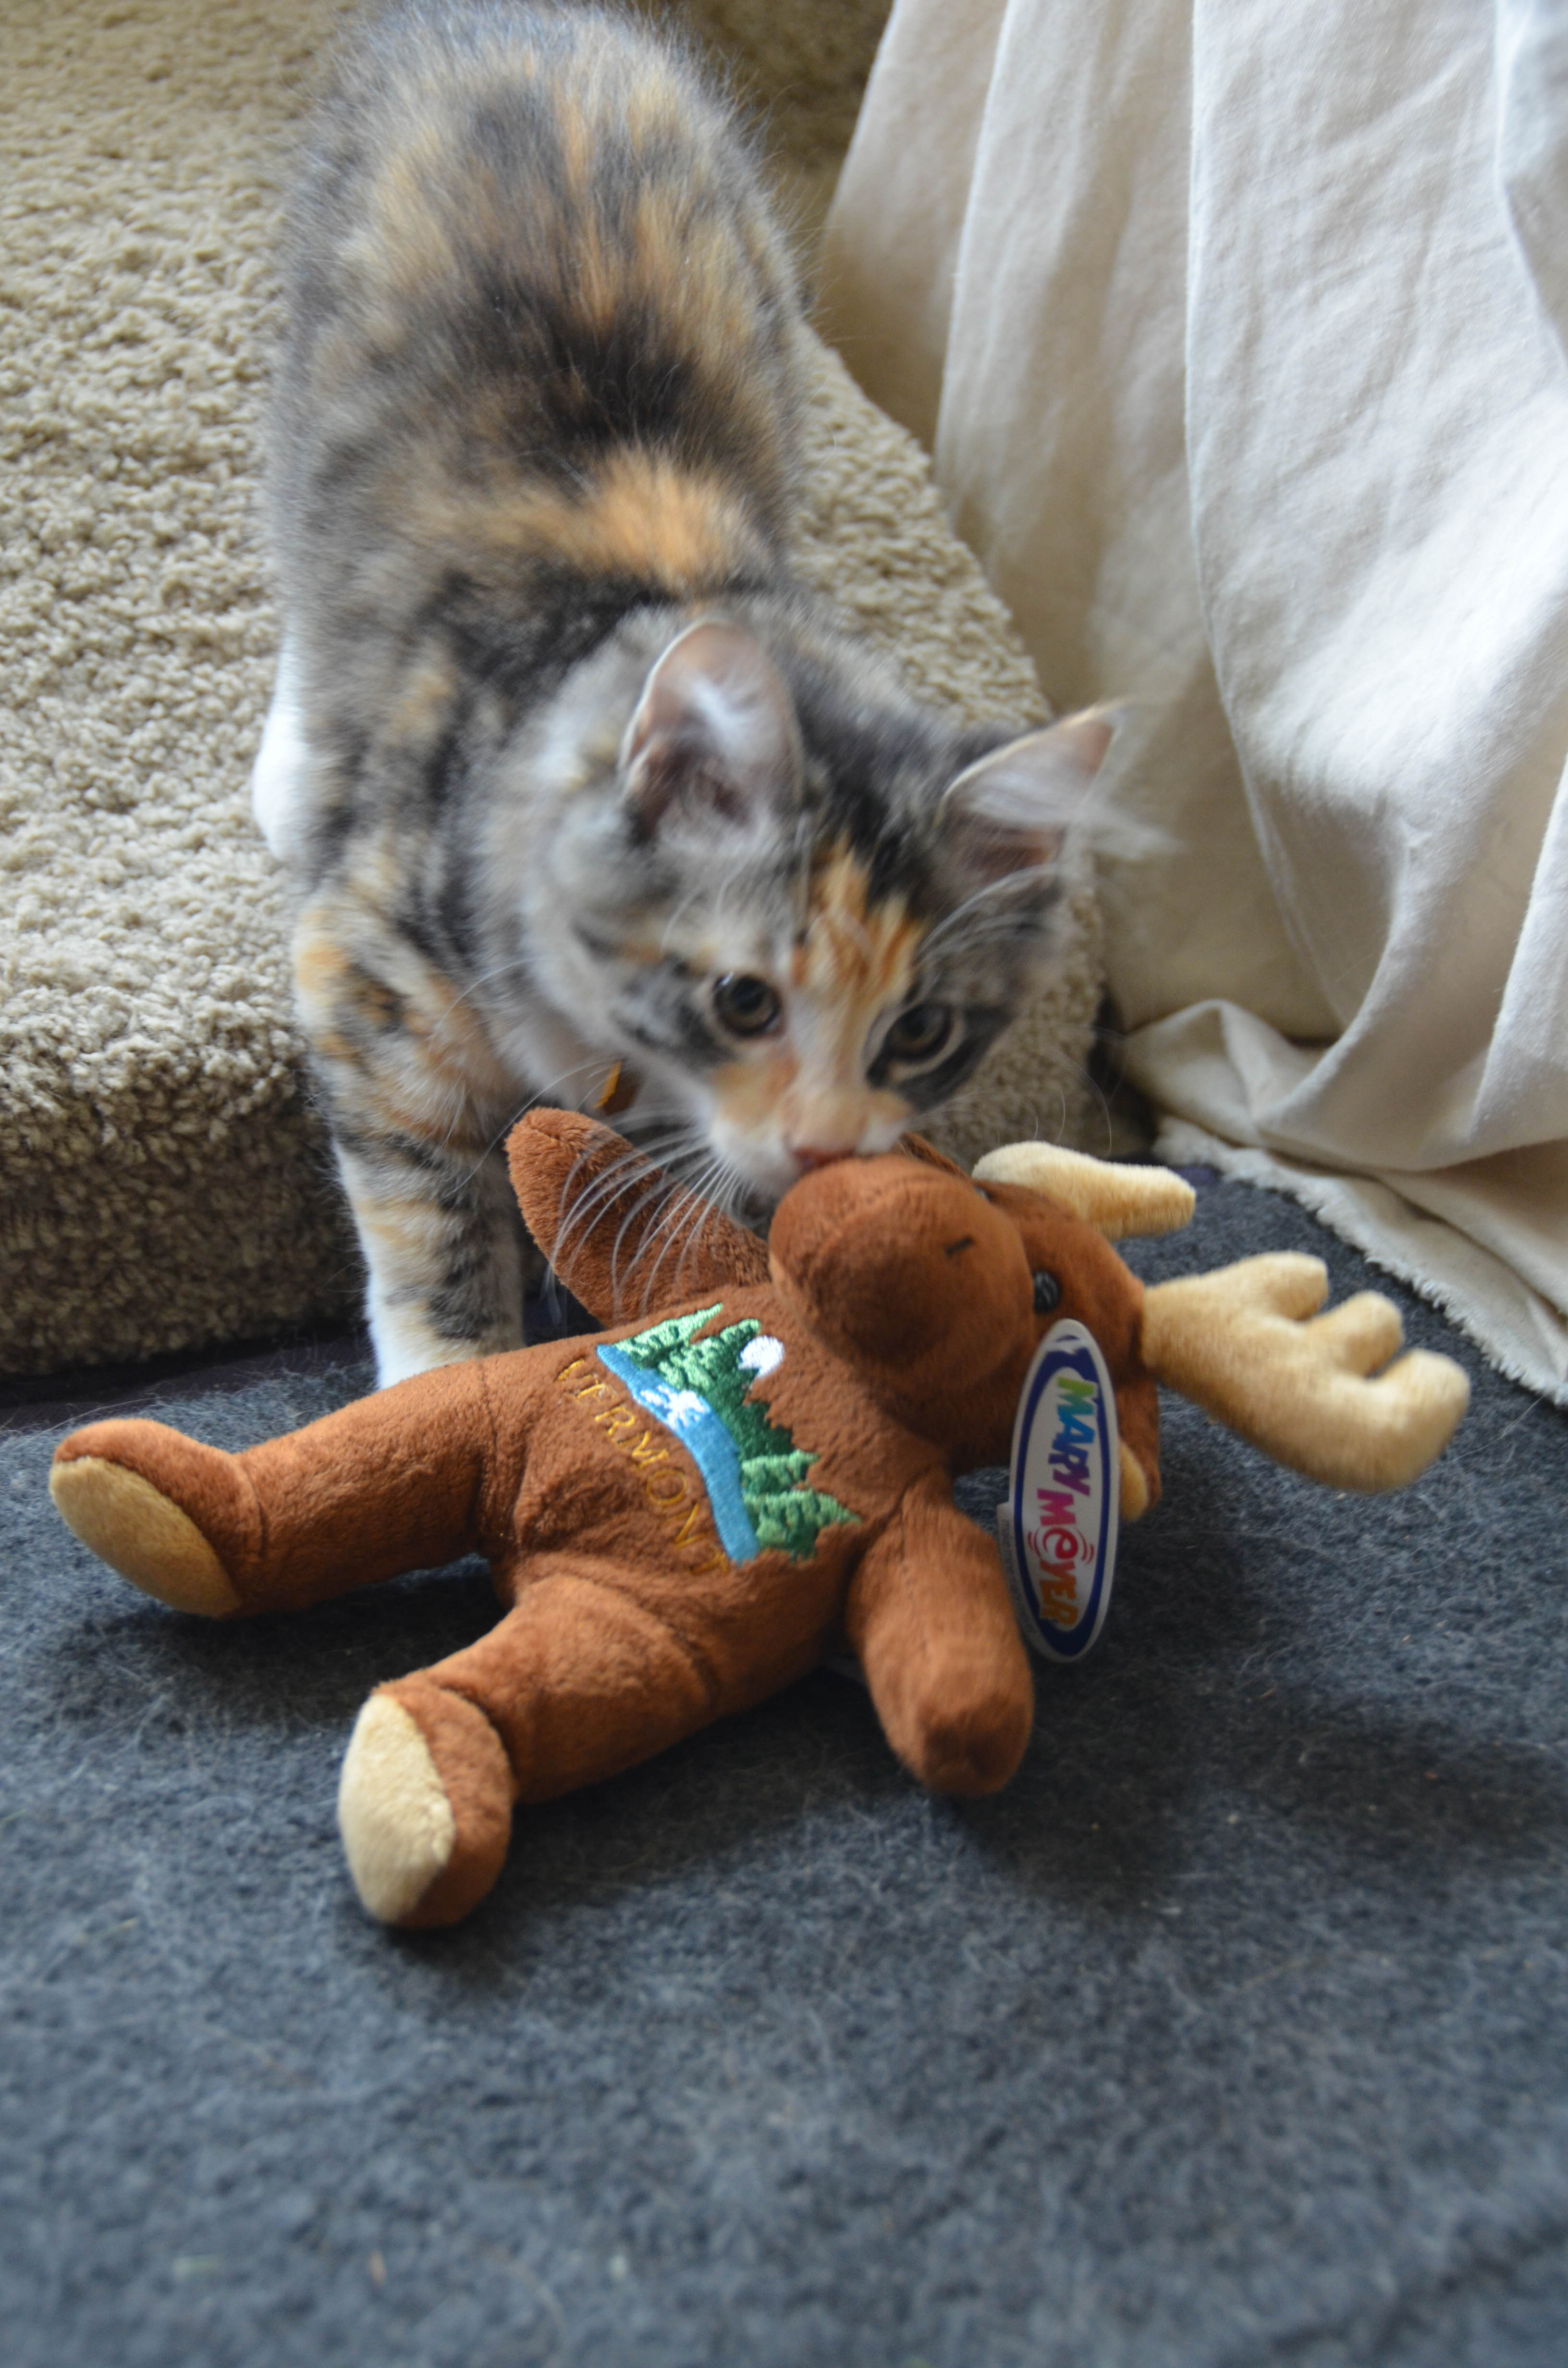 We brought Gypsy and Bailey souvenir toys from the creamery.